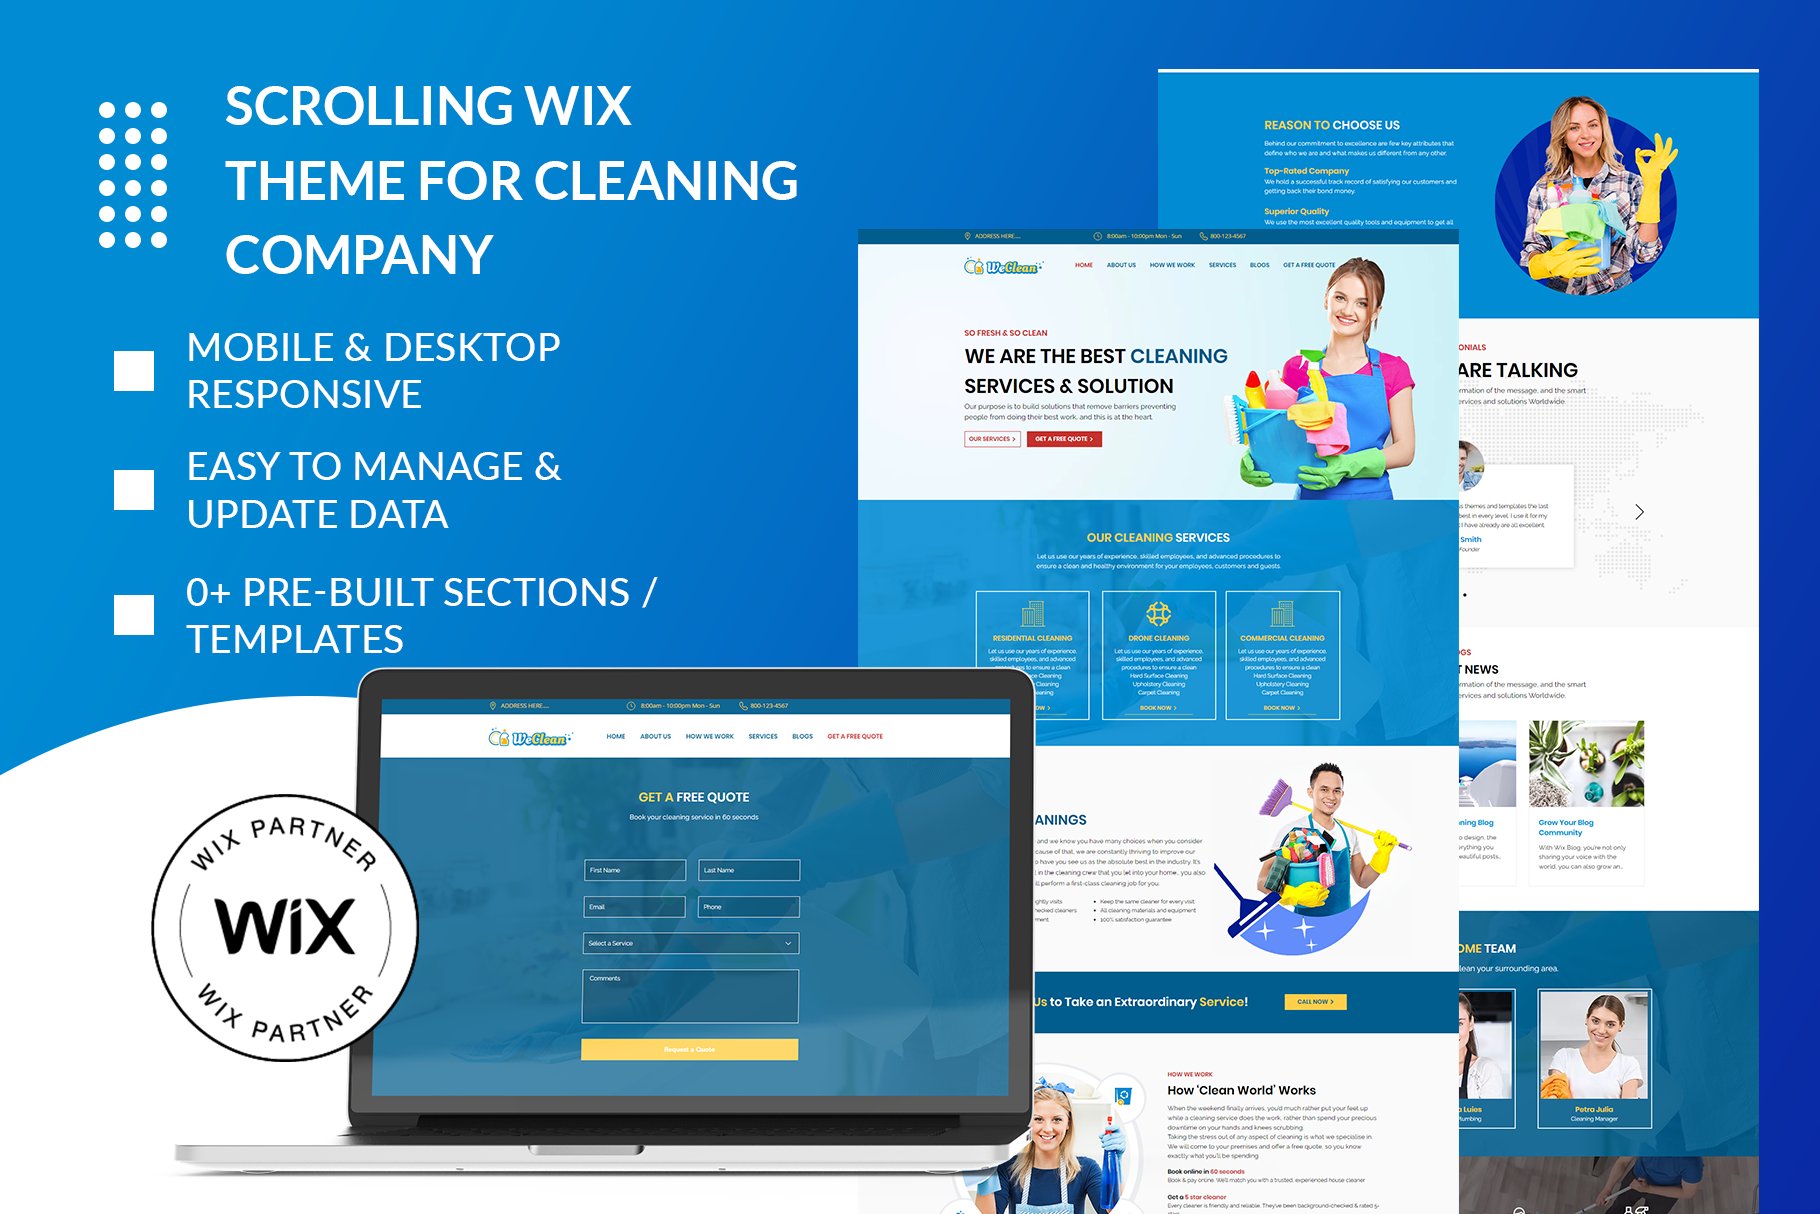 Wix Theme for Cleaning Services cover image.